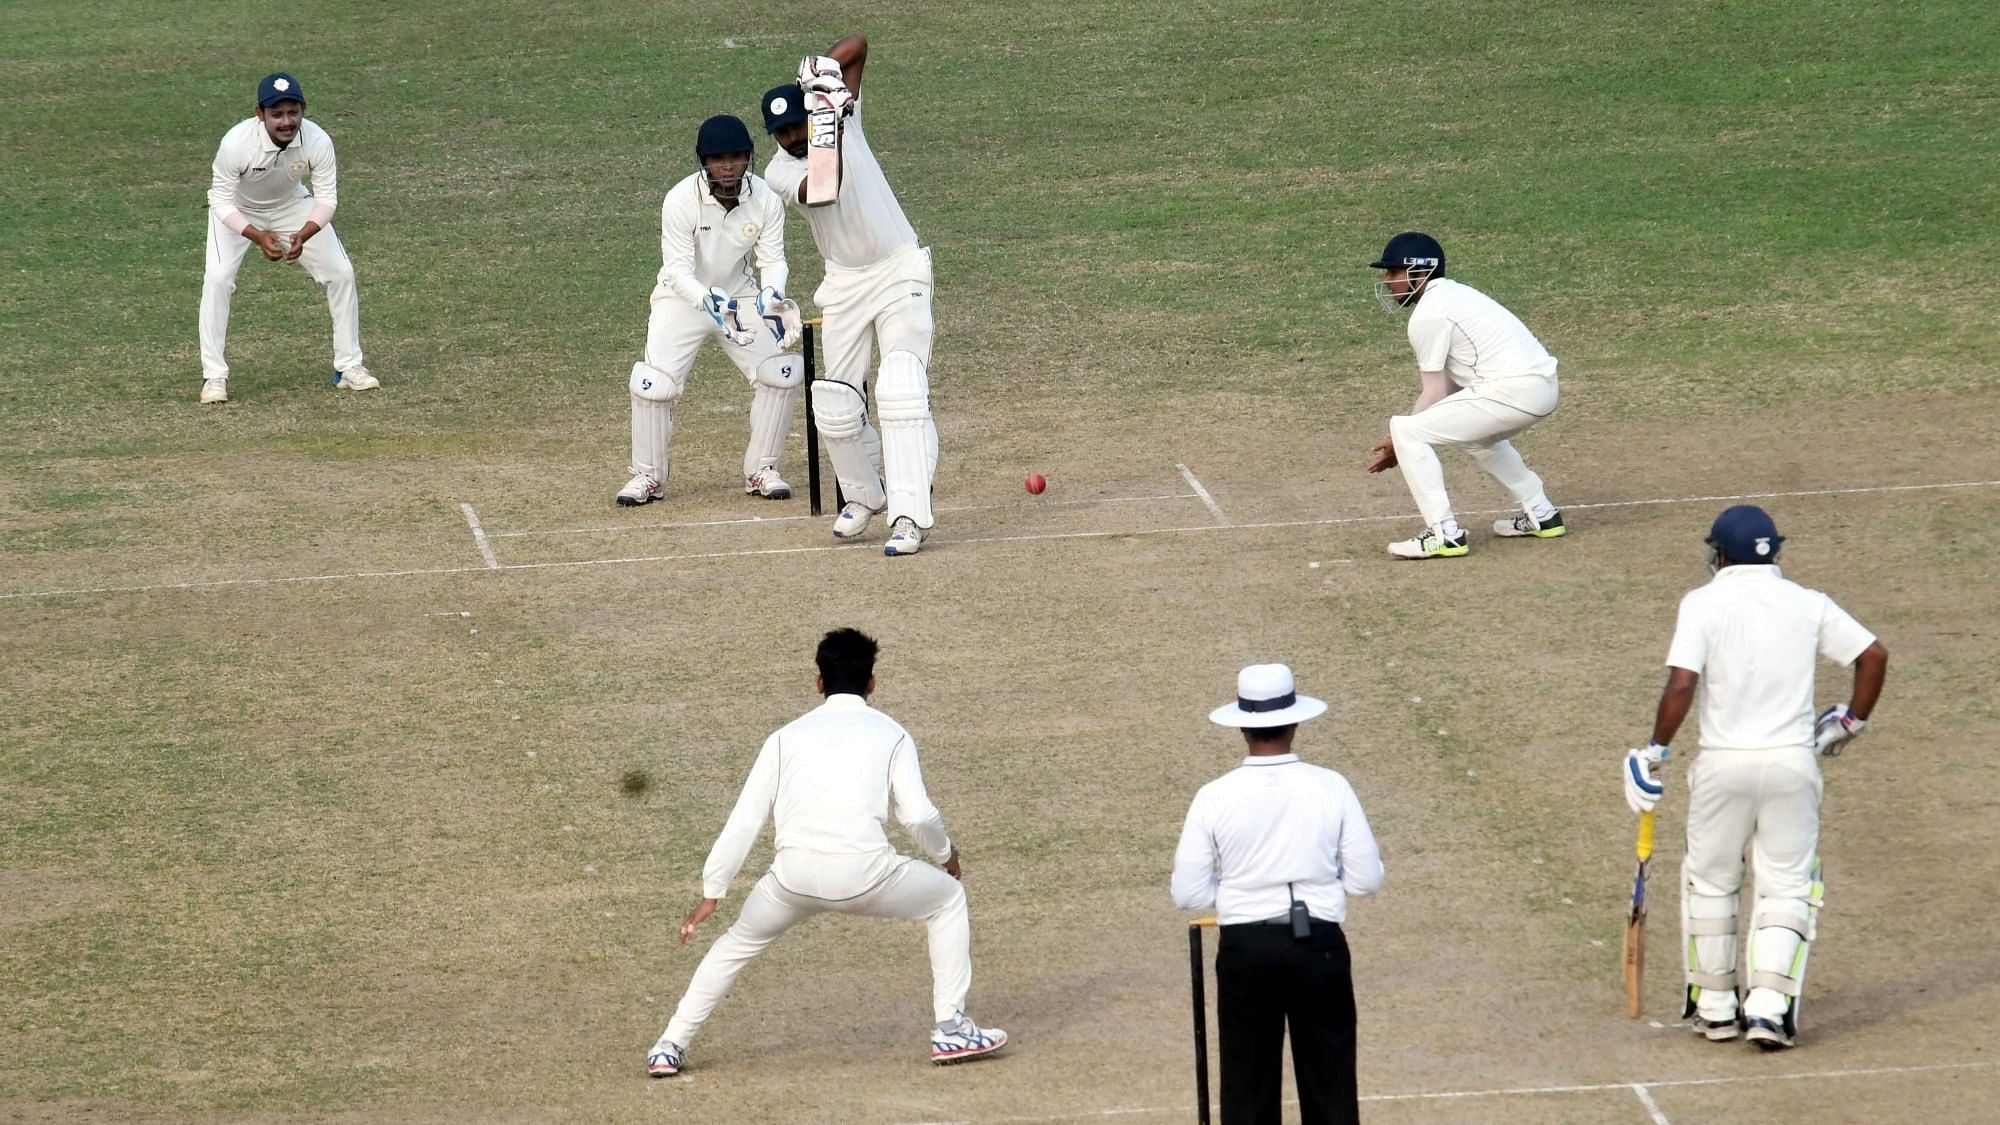 Cricketers emerging from the union territory of Ladakh will represent Jammu and Kashmir in the domestic circuit. This is a file photo from a Ranji Trophy match.